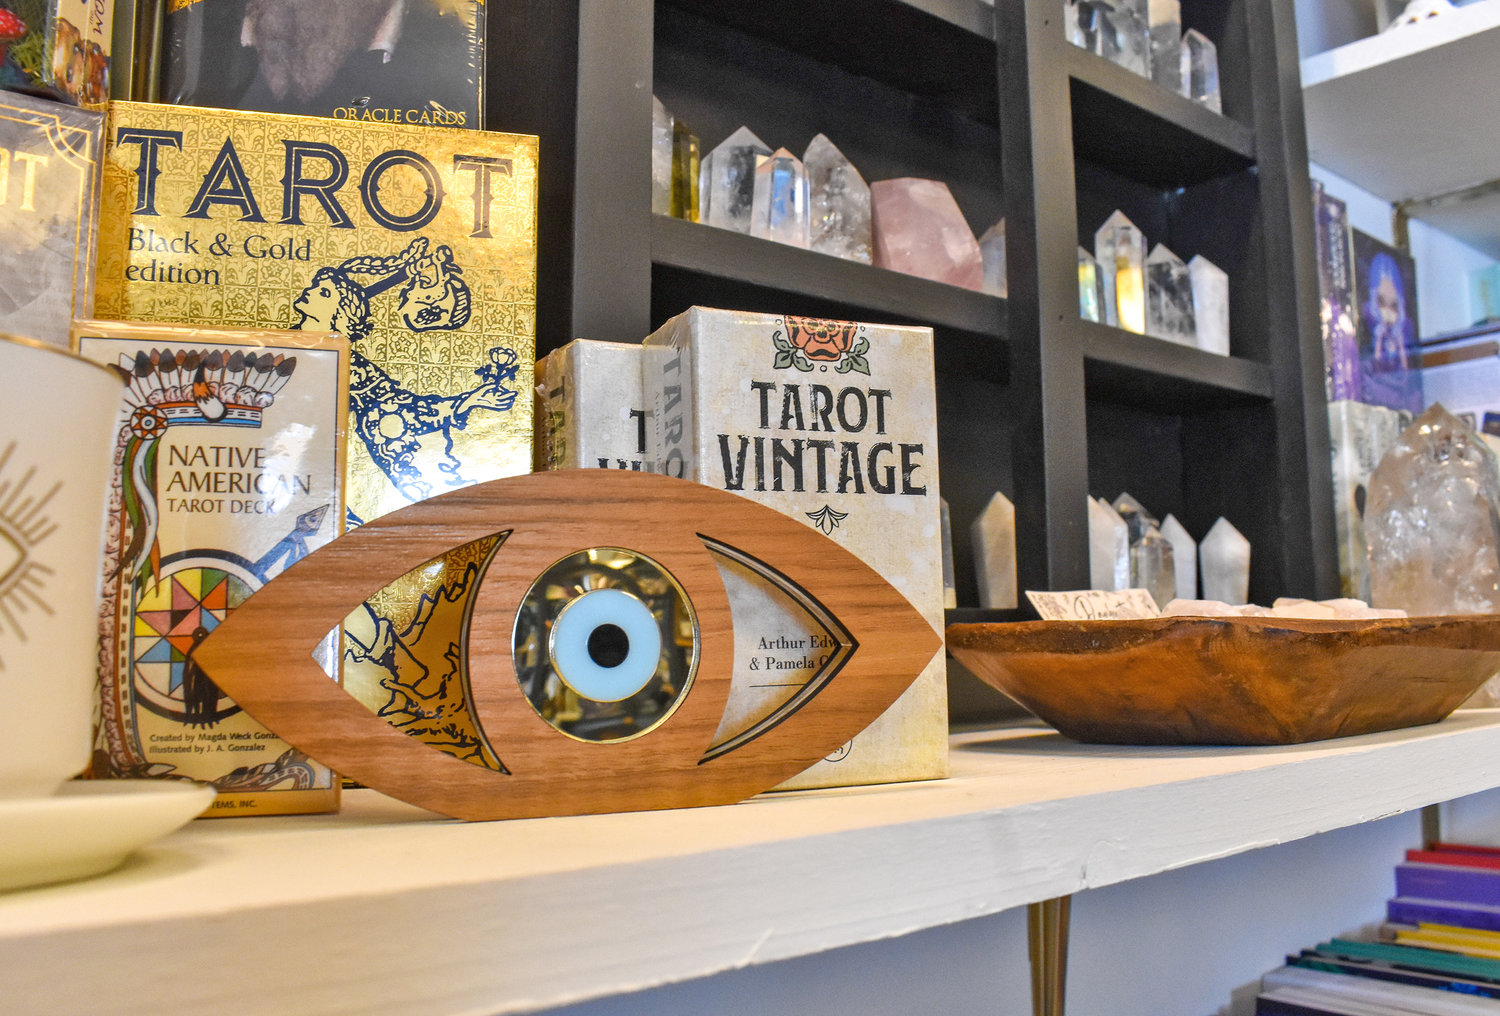 Tarot cards, crystals, decor, and more are offered at The Magical Muse.